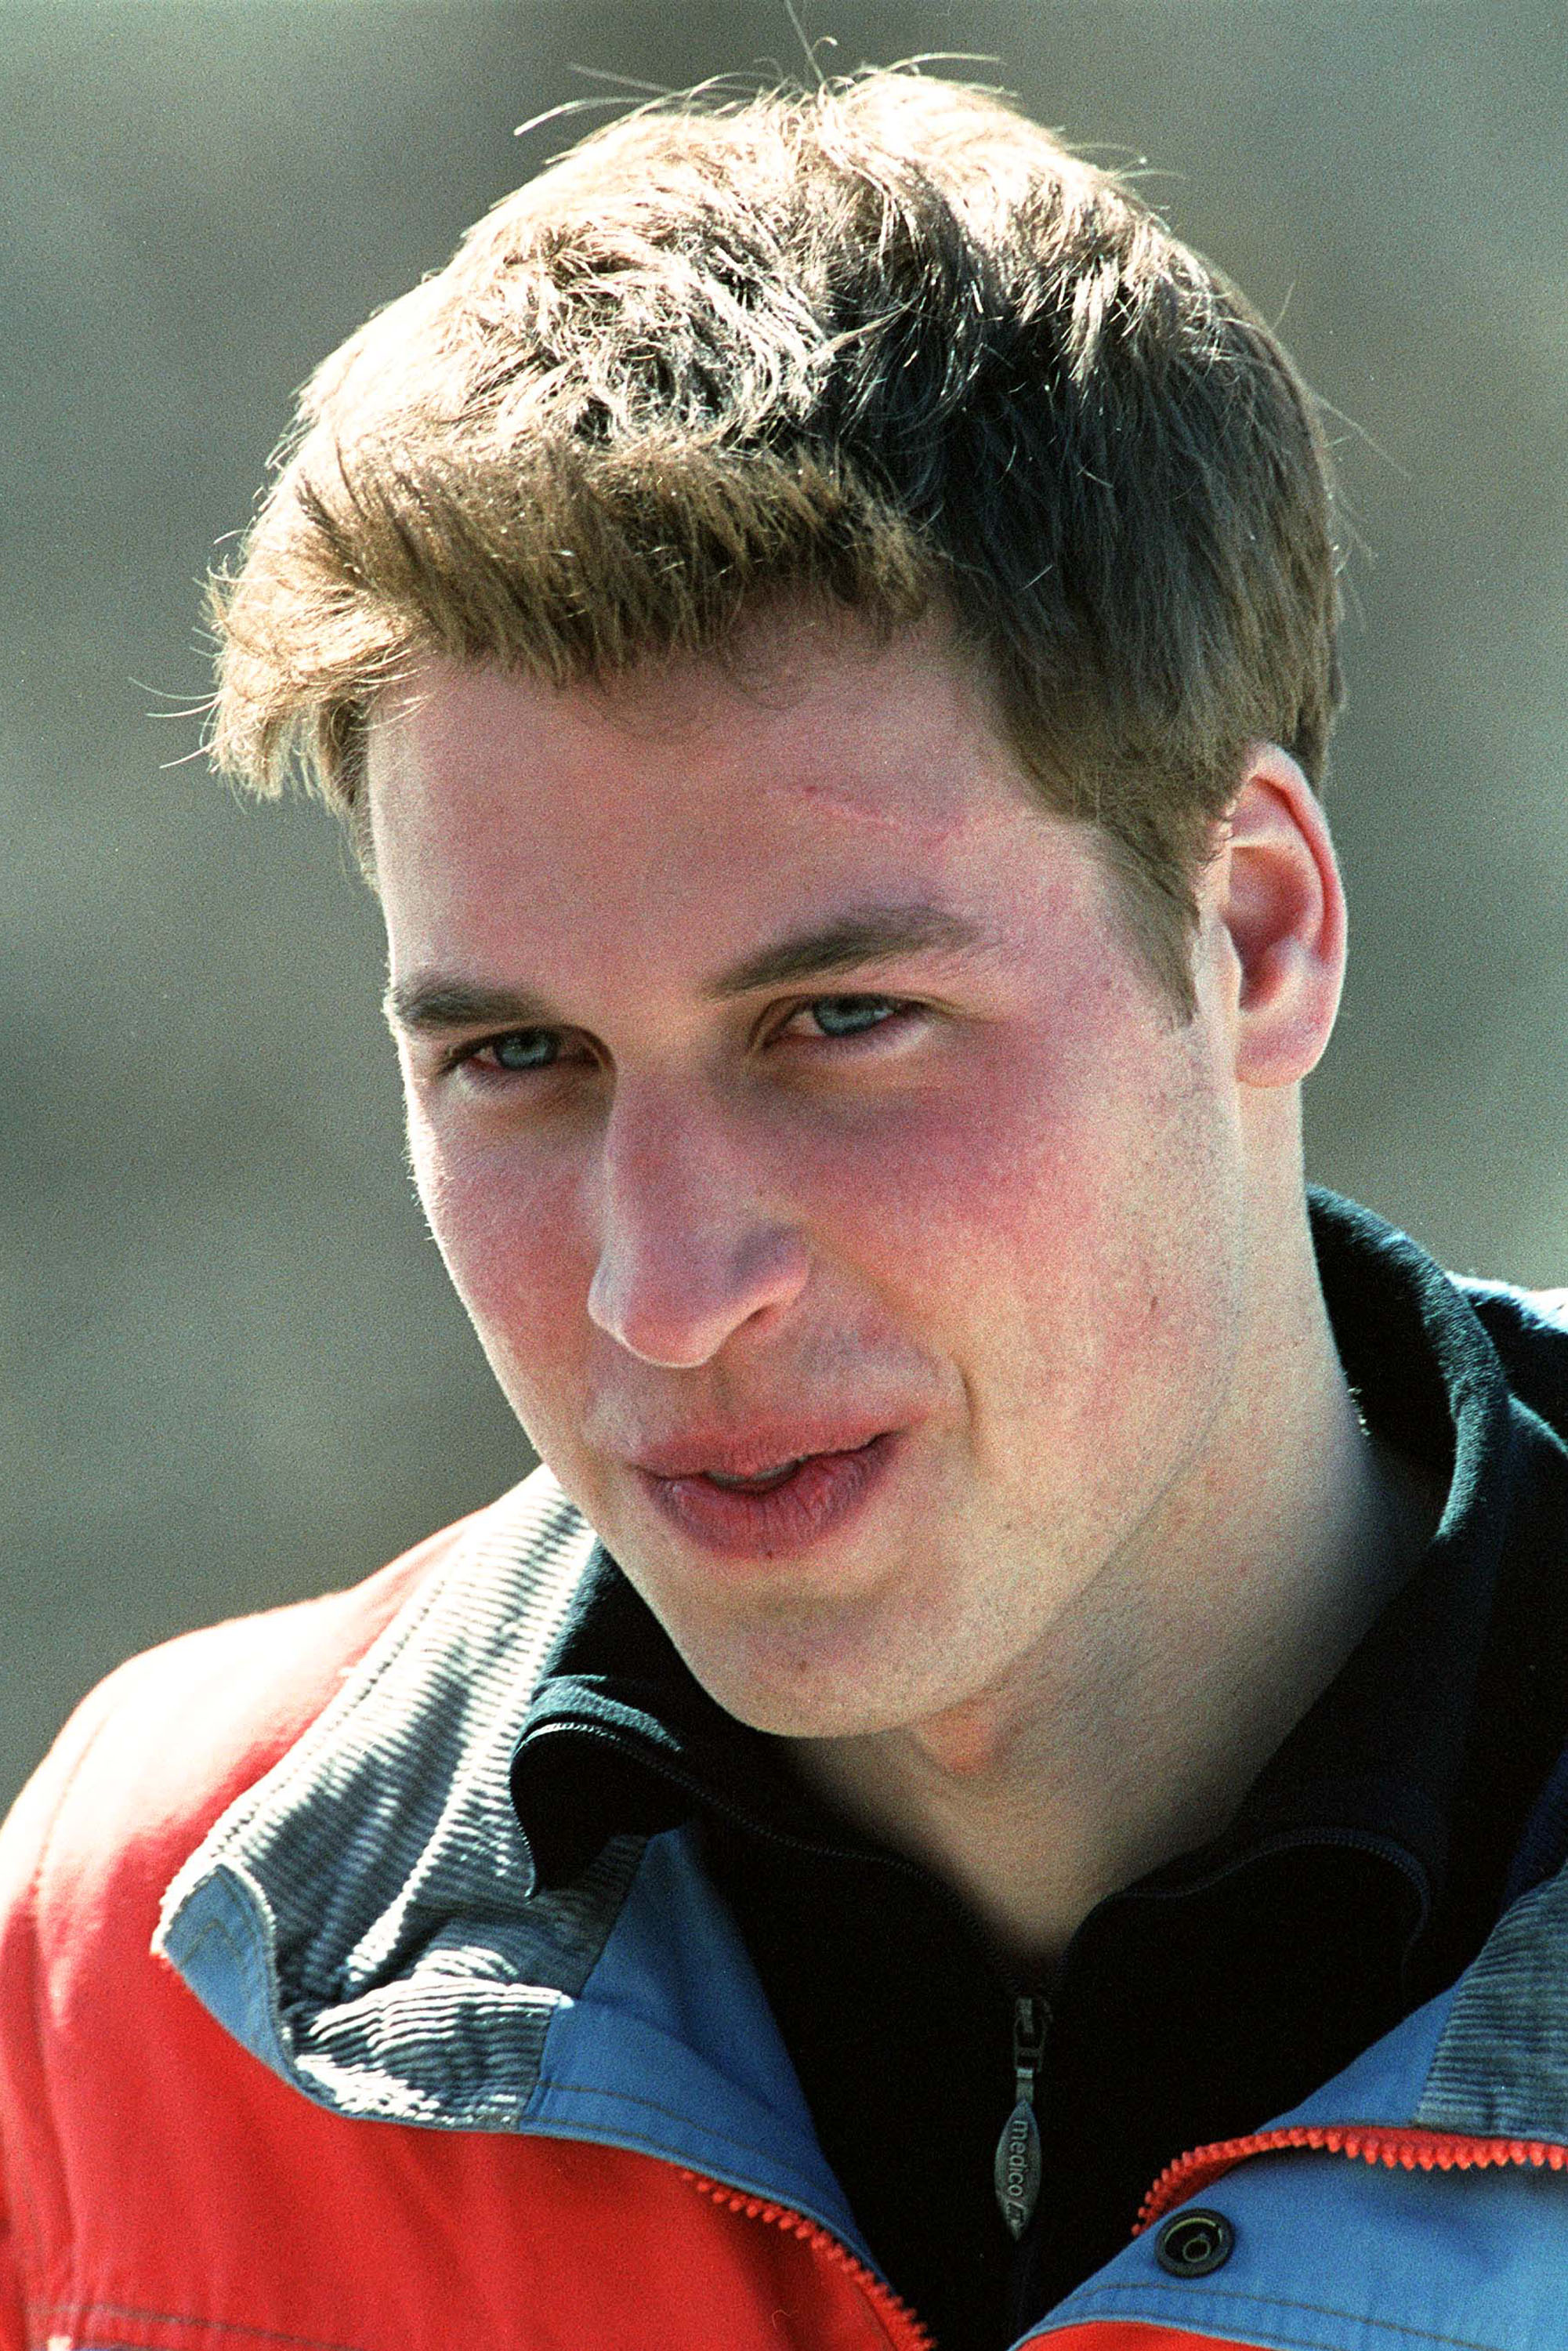 Prince William in his younger days | Photo: Getty Images